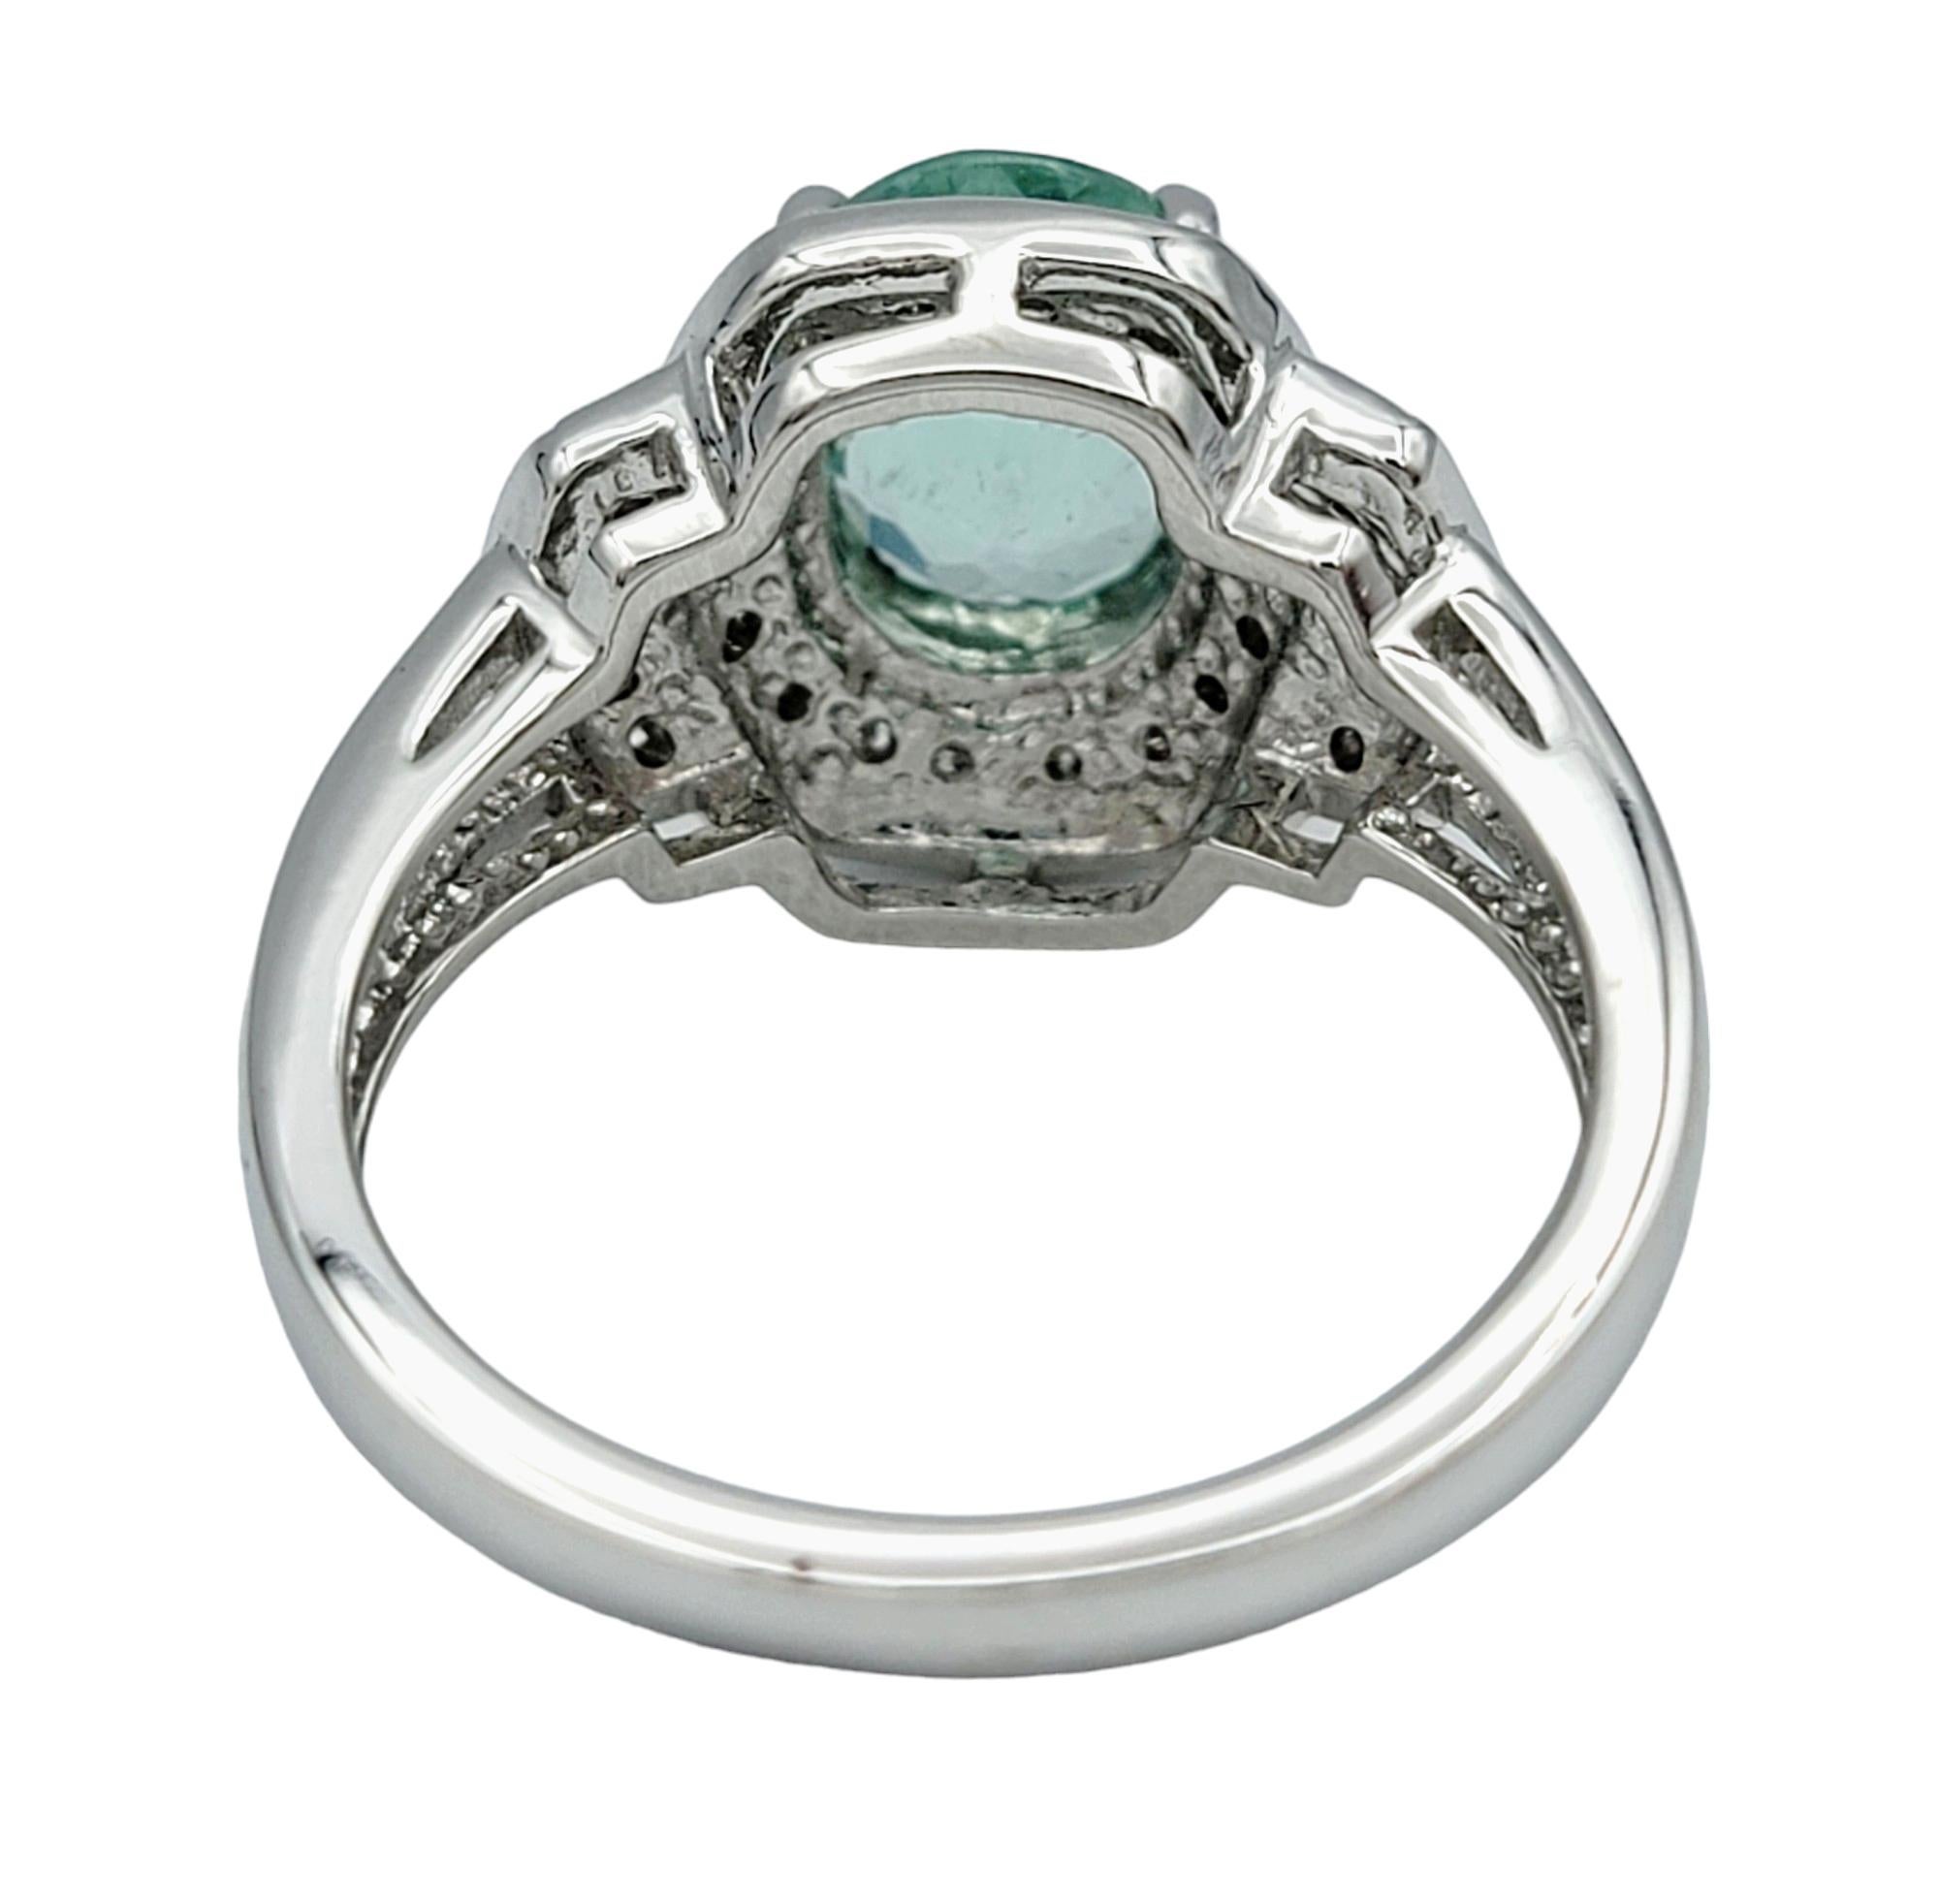 Oval Paraiba Tourmaline Ring with Round Diamond Halo Set in 18 Karat White Gold In Good Condition For Sale In Scottsdale, AZ